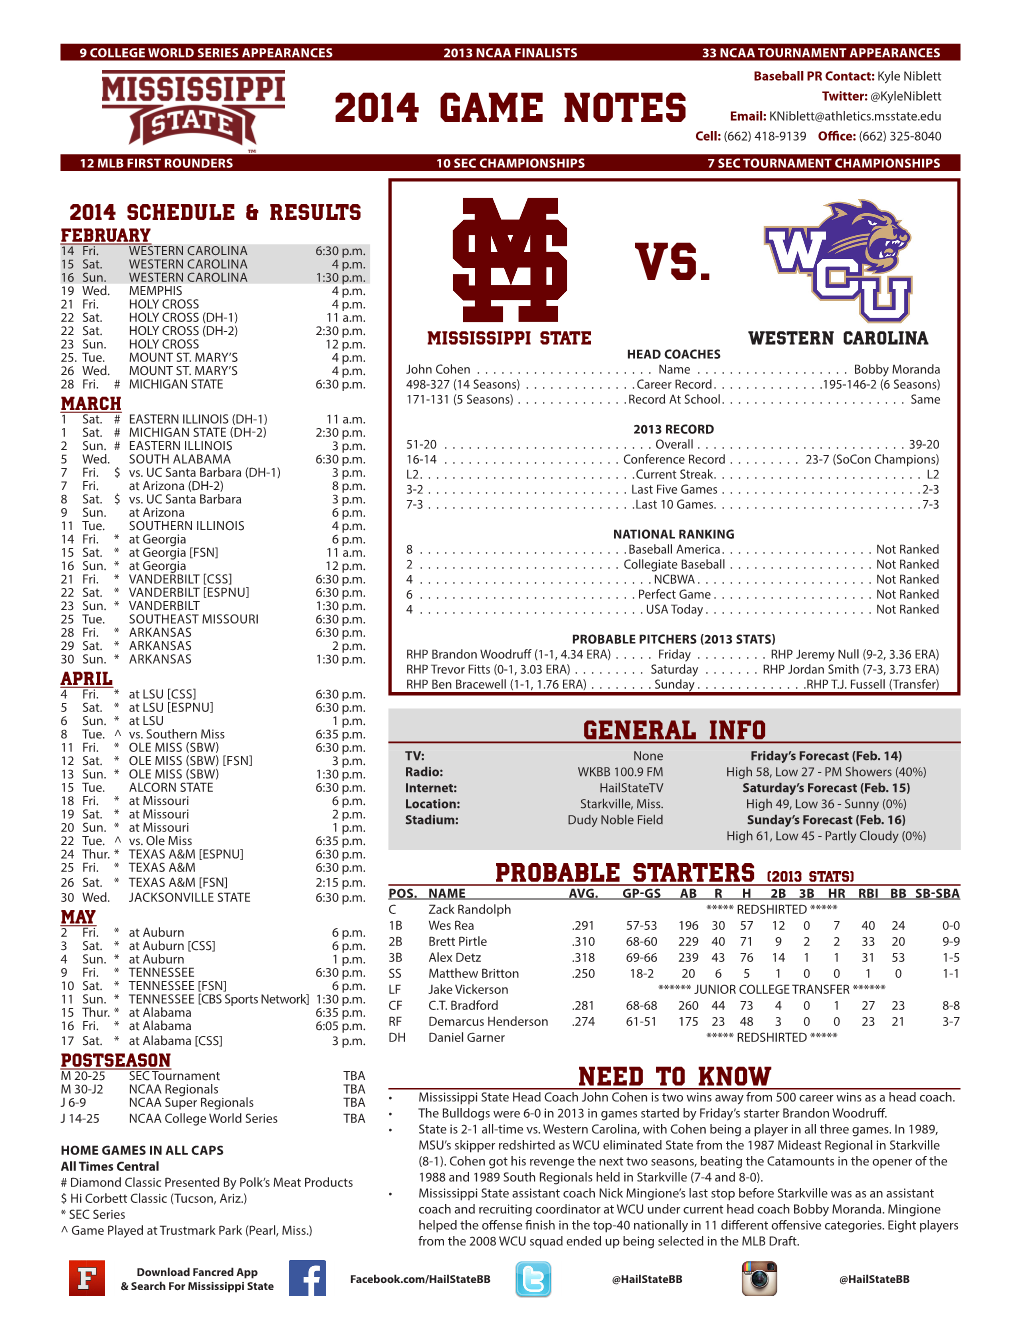 2014 GAME NOTES Email: Kniblett@Athletics.Msstate.Edu Cell: (662) 418-9139 Office:(662) 325-8040